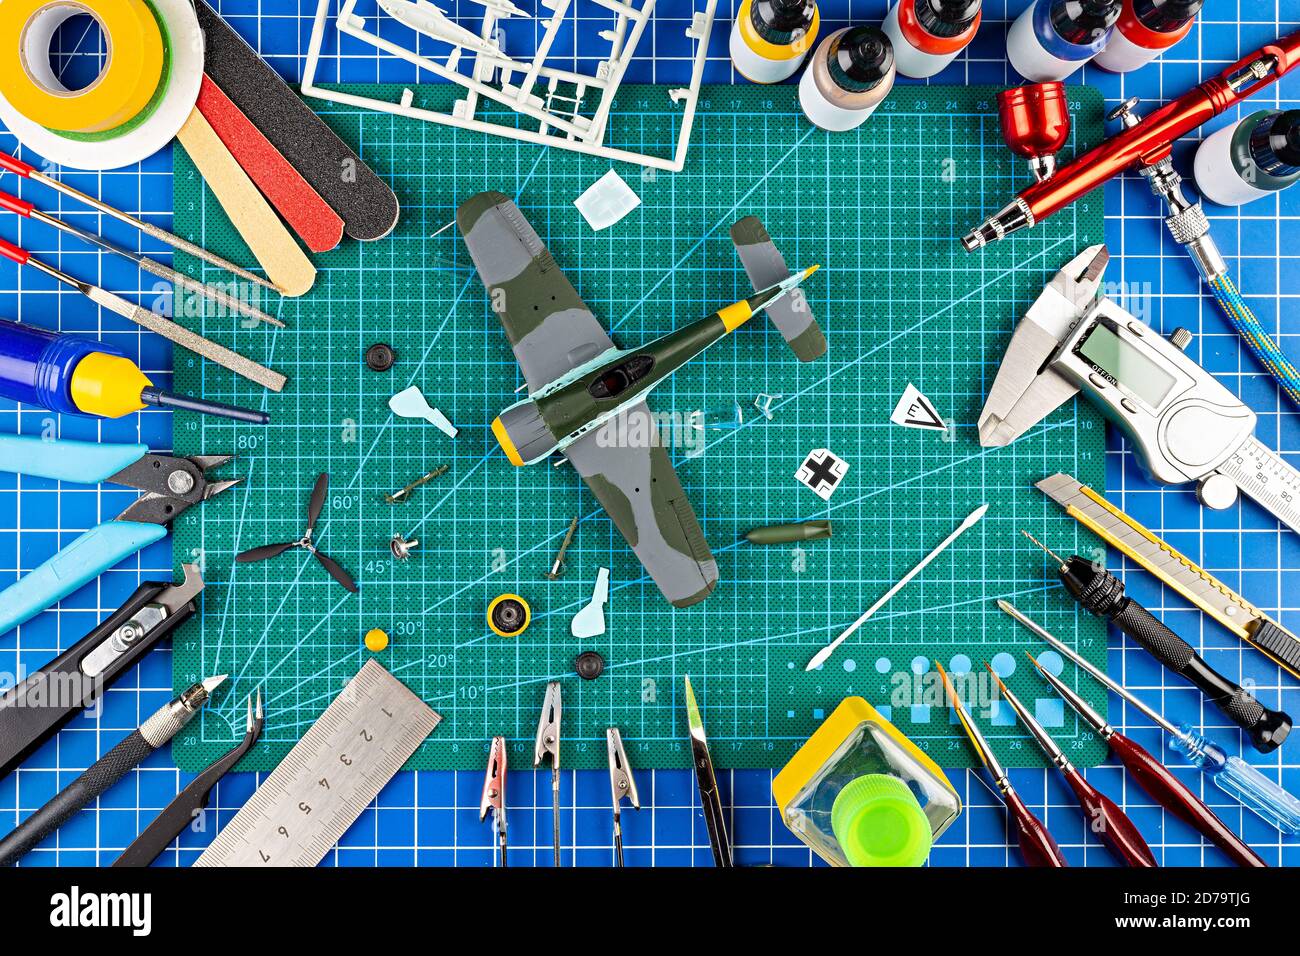 desktop view from above of assembly and painting of retro scale model fighter plane concept background. modeling tools airbrush gun paint kit parts bl Stock Photo